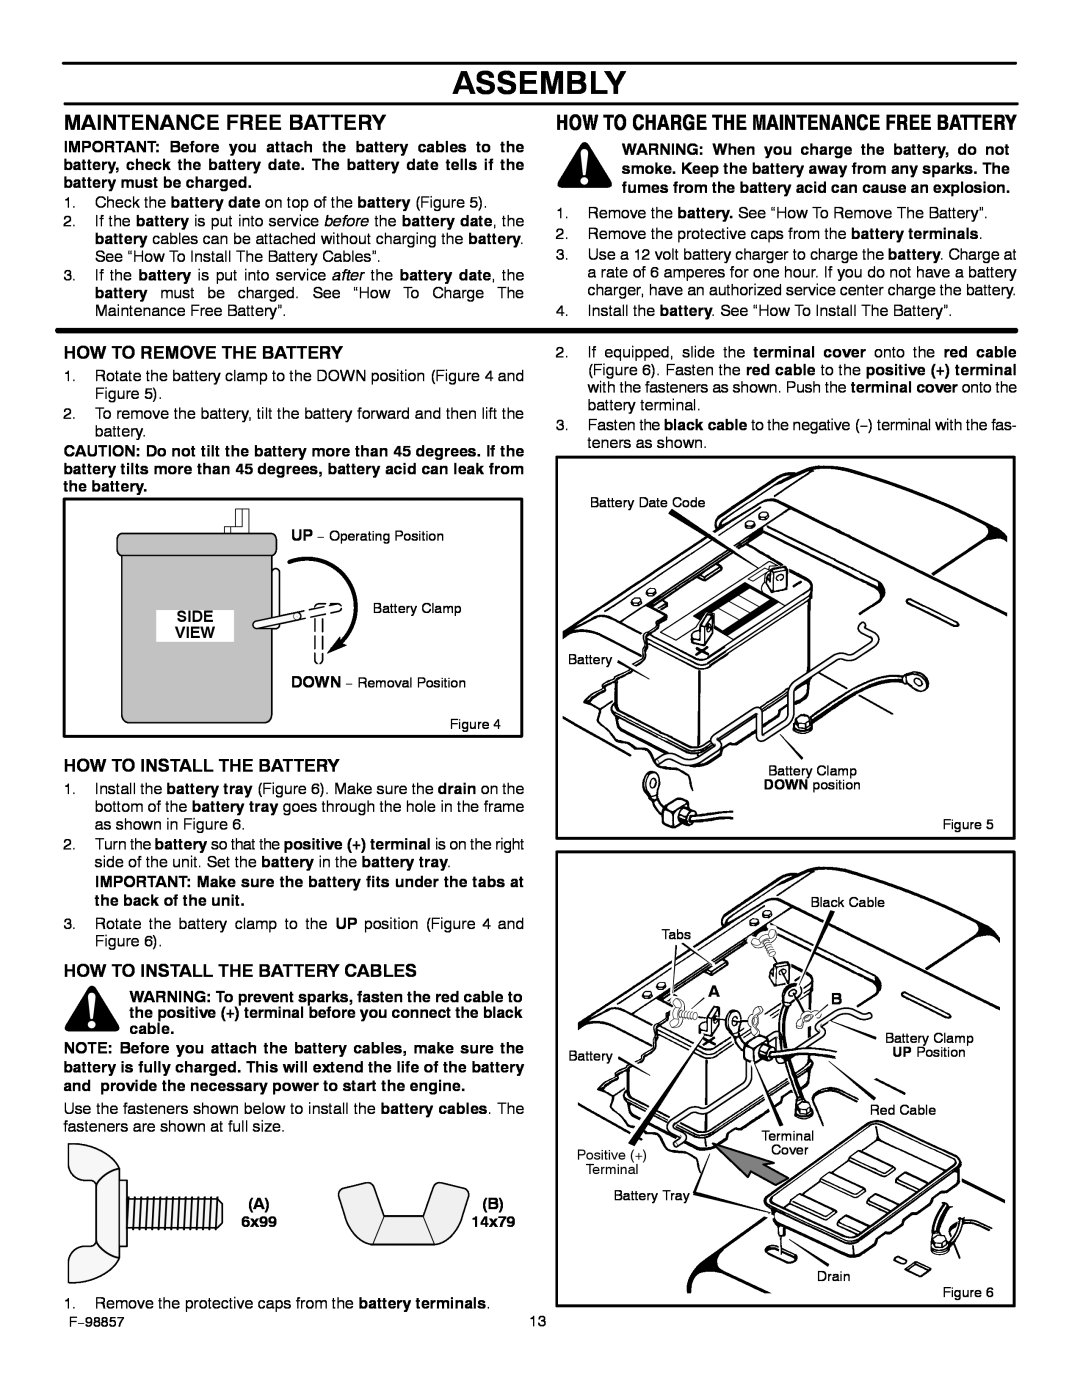 Hayter Mowers 30-Dec manual How To Charge The Maintenance Free Battery, Assembly 